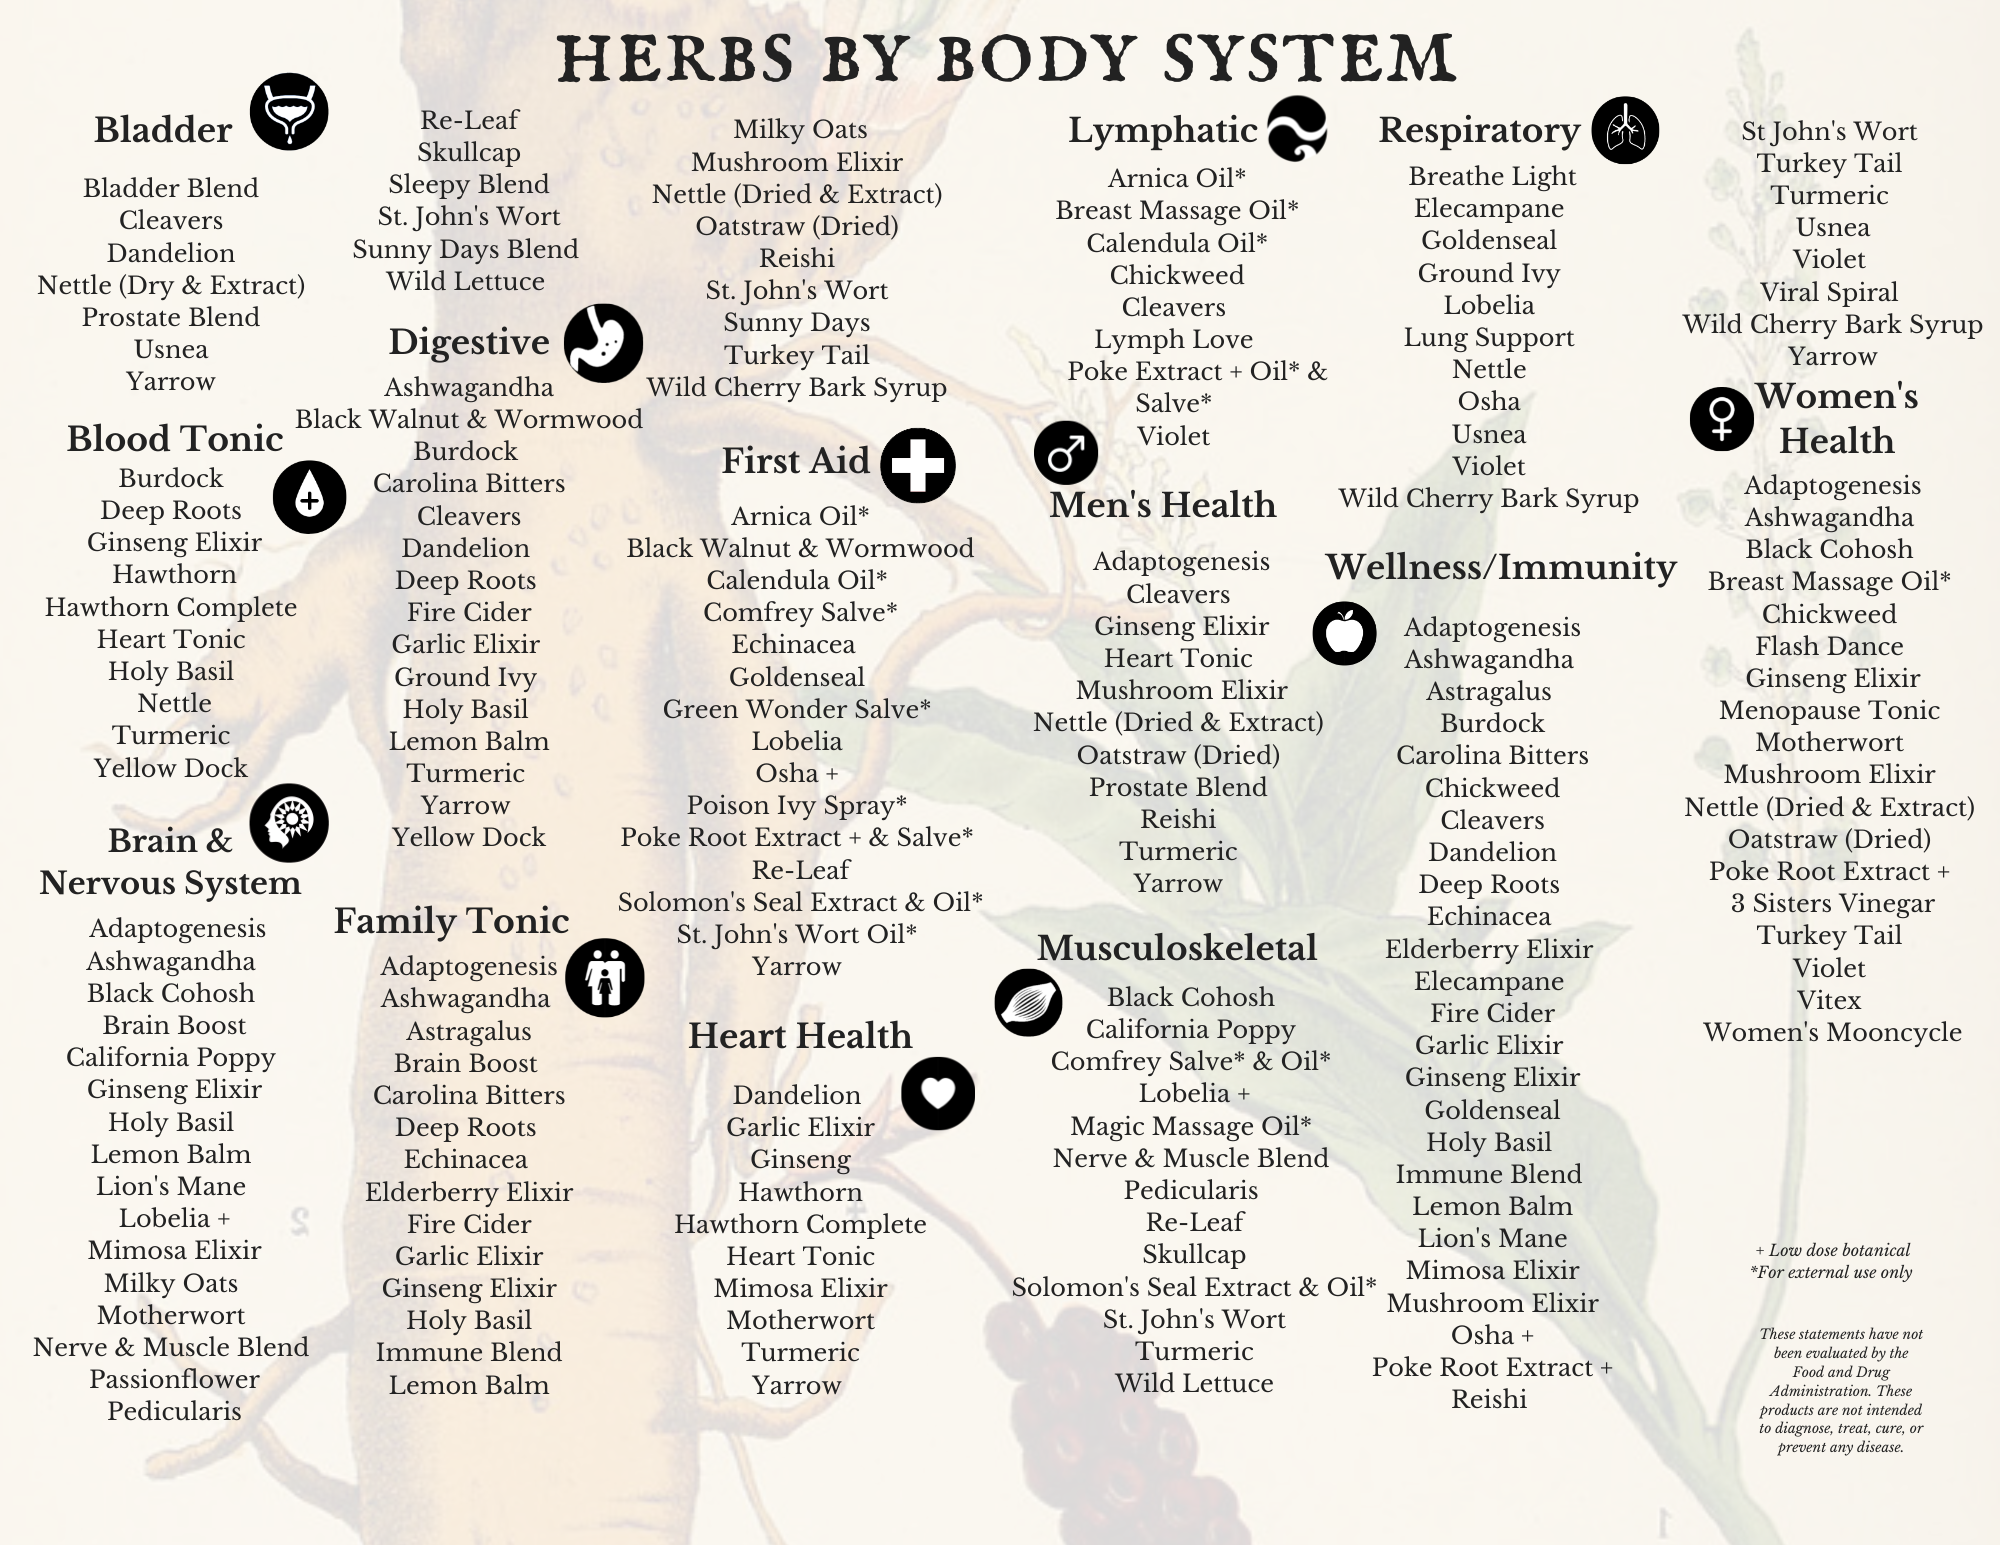 Herbs by Body System